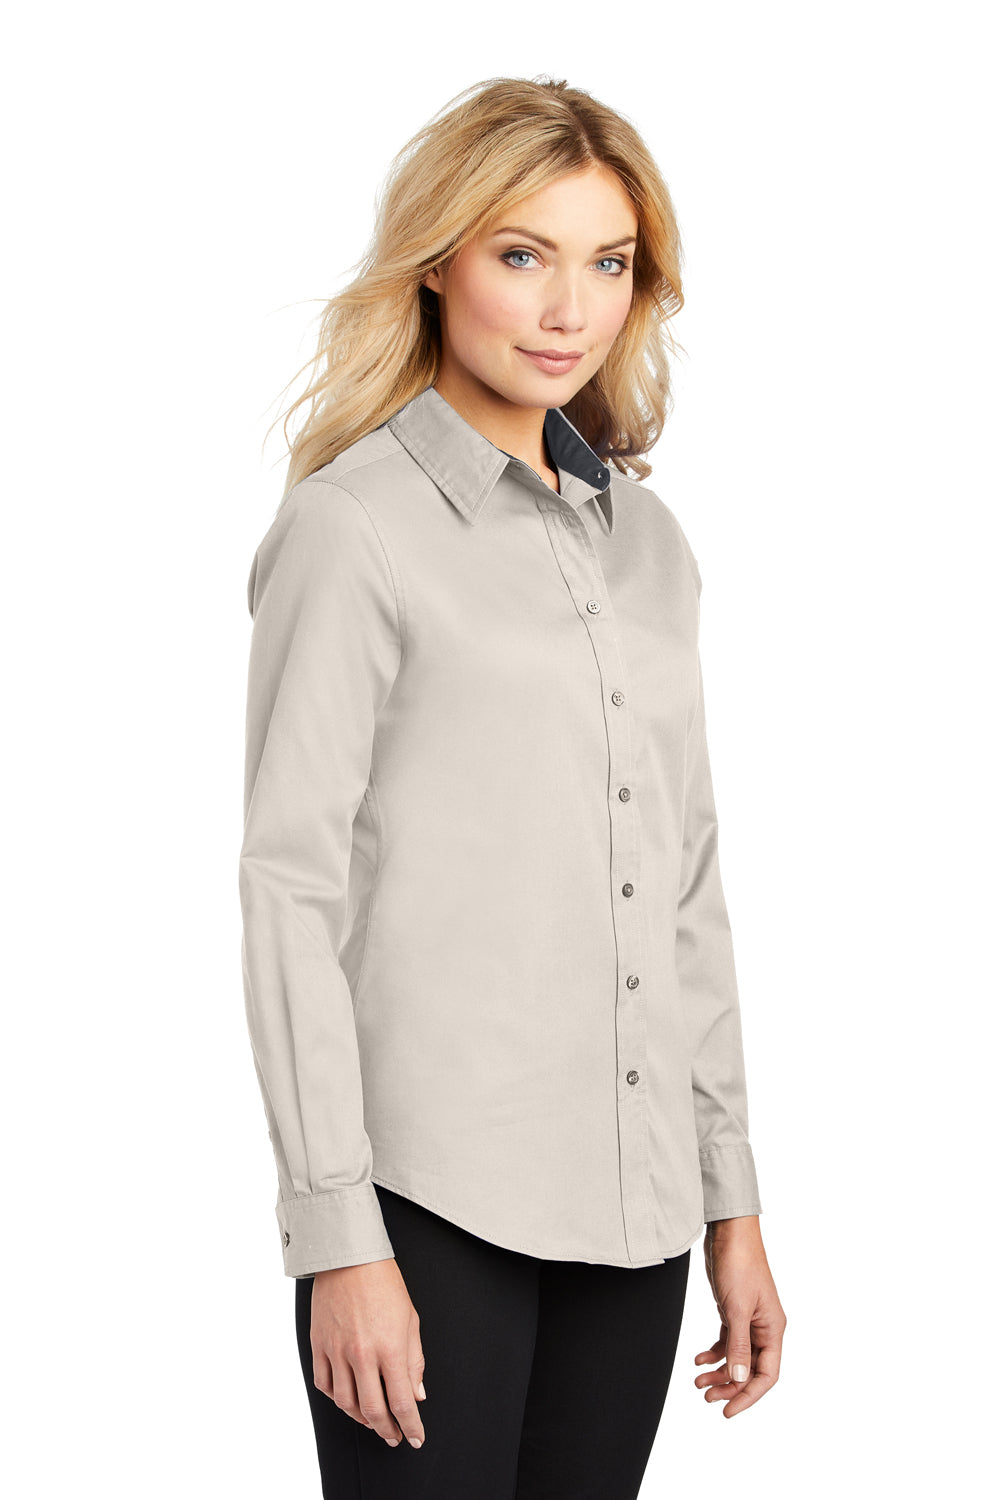 Port Authority L608 Womens Easy Care Wrinkle Resistant Long Sleeve Button Down Shirt Light Stone 3Q